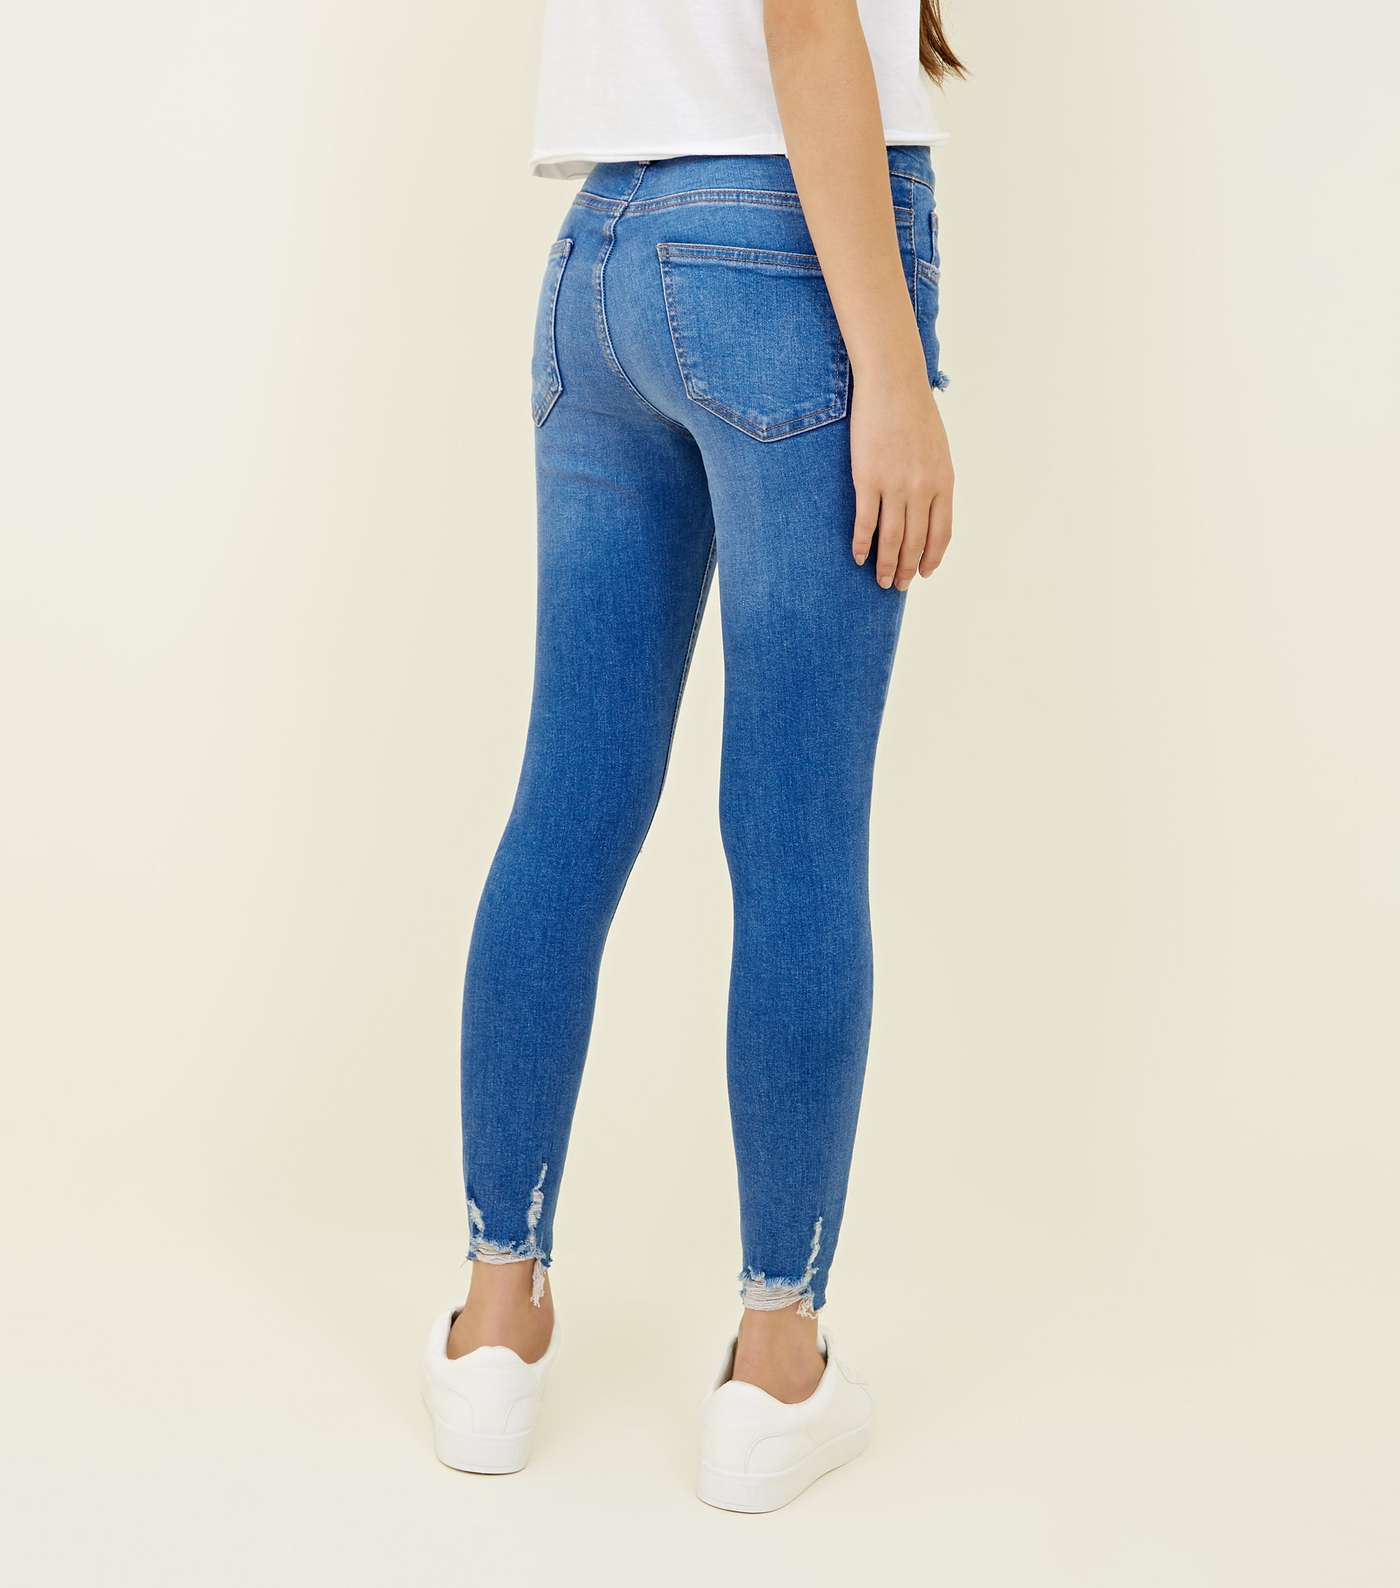 Girls Bright Blue Ripped Skinny Jeans Image 5